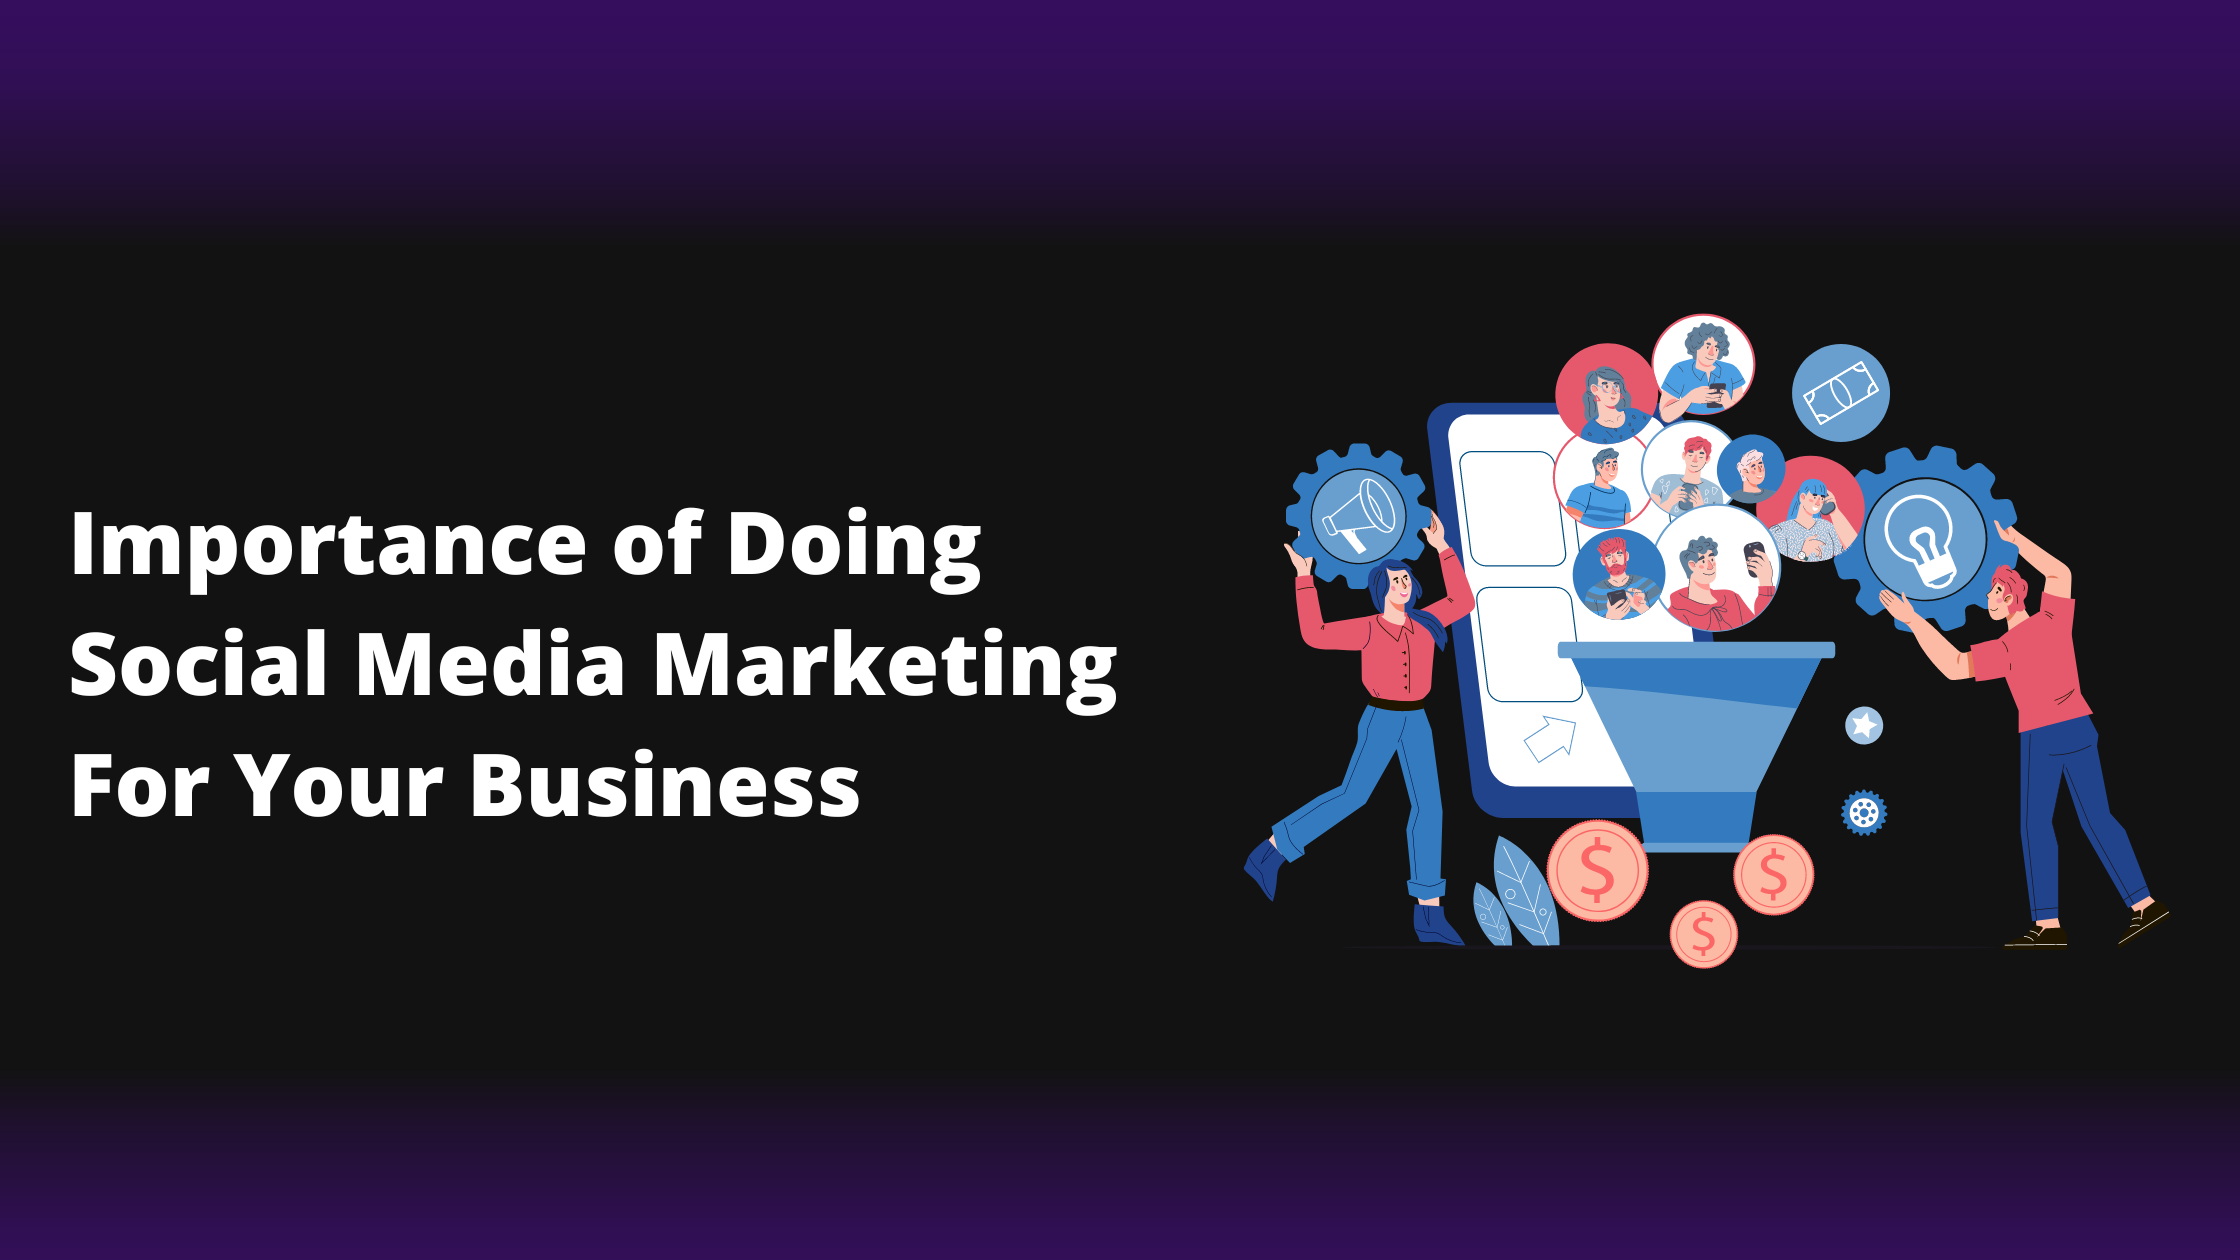 Importance of doing social media marketing for your business